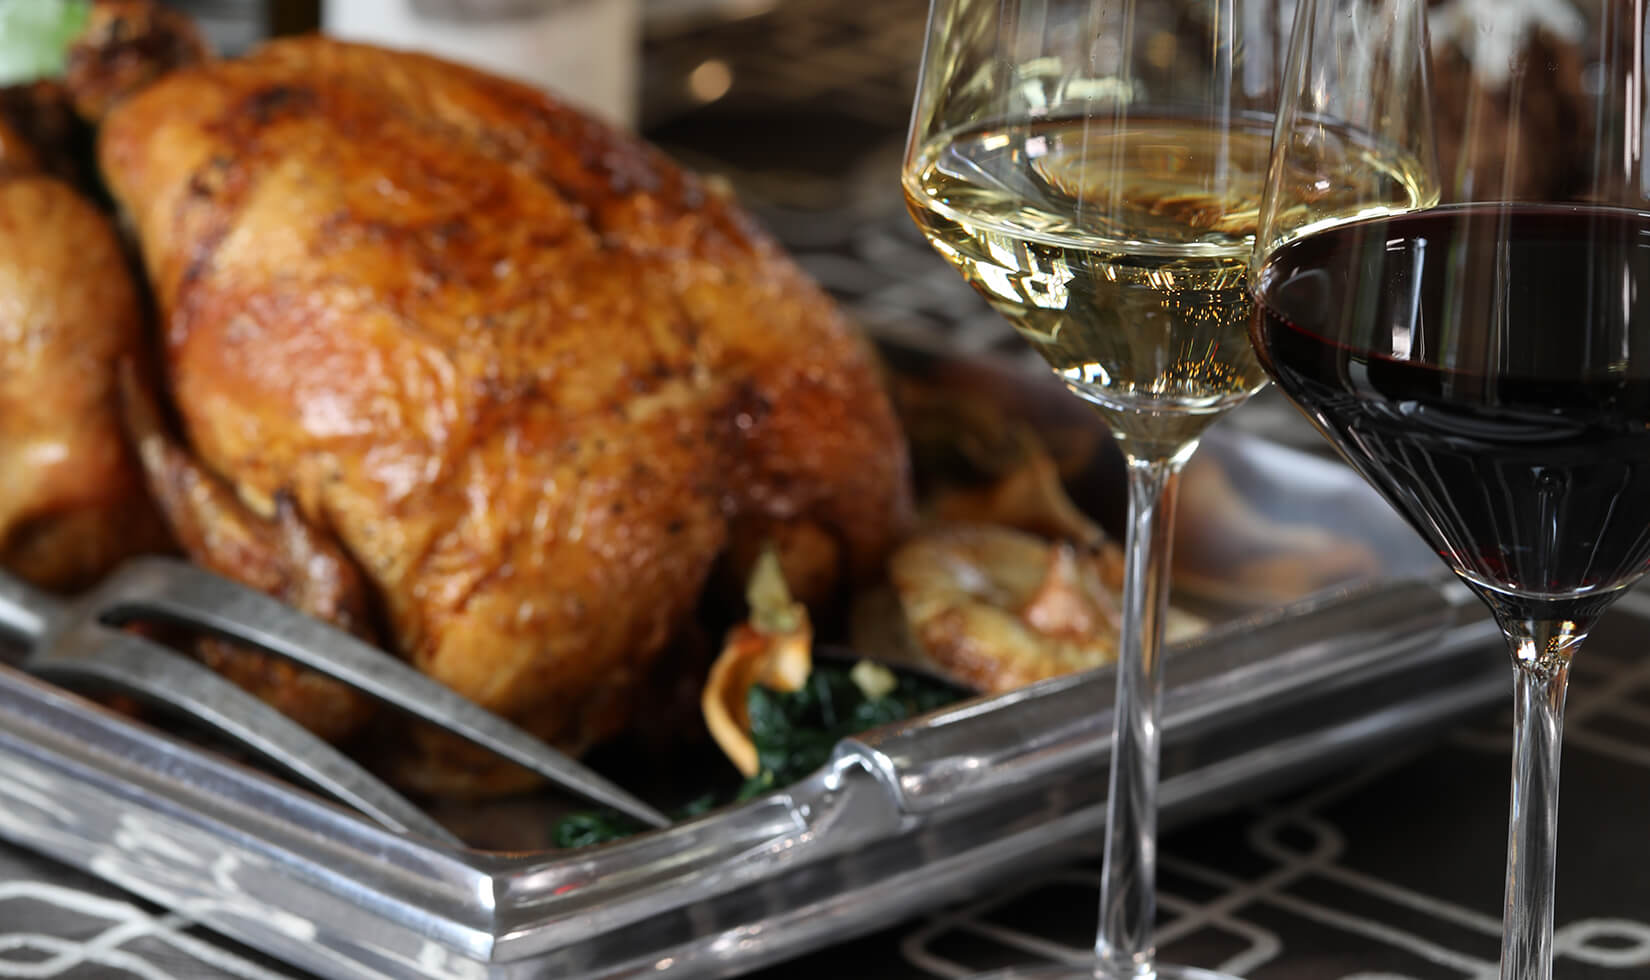 Jordan Winery Roasted Turkey with Dry Brine on a tray next to a glass of white and glass of red wine